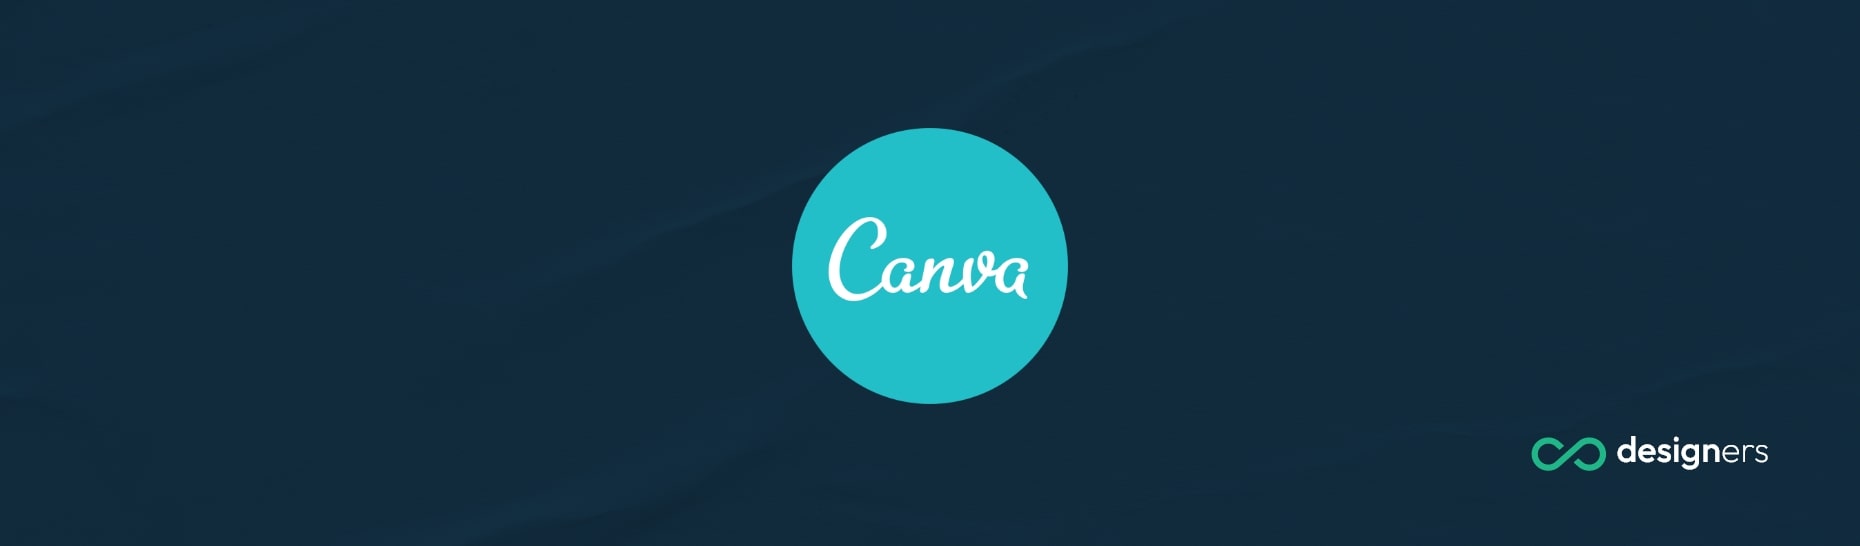 What Is the Tagline of Canva?